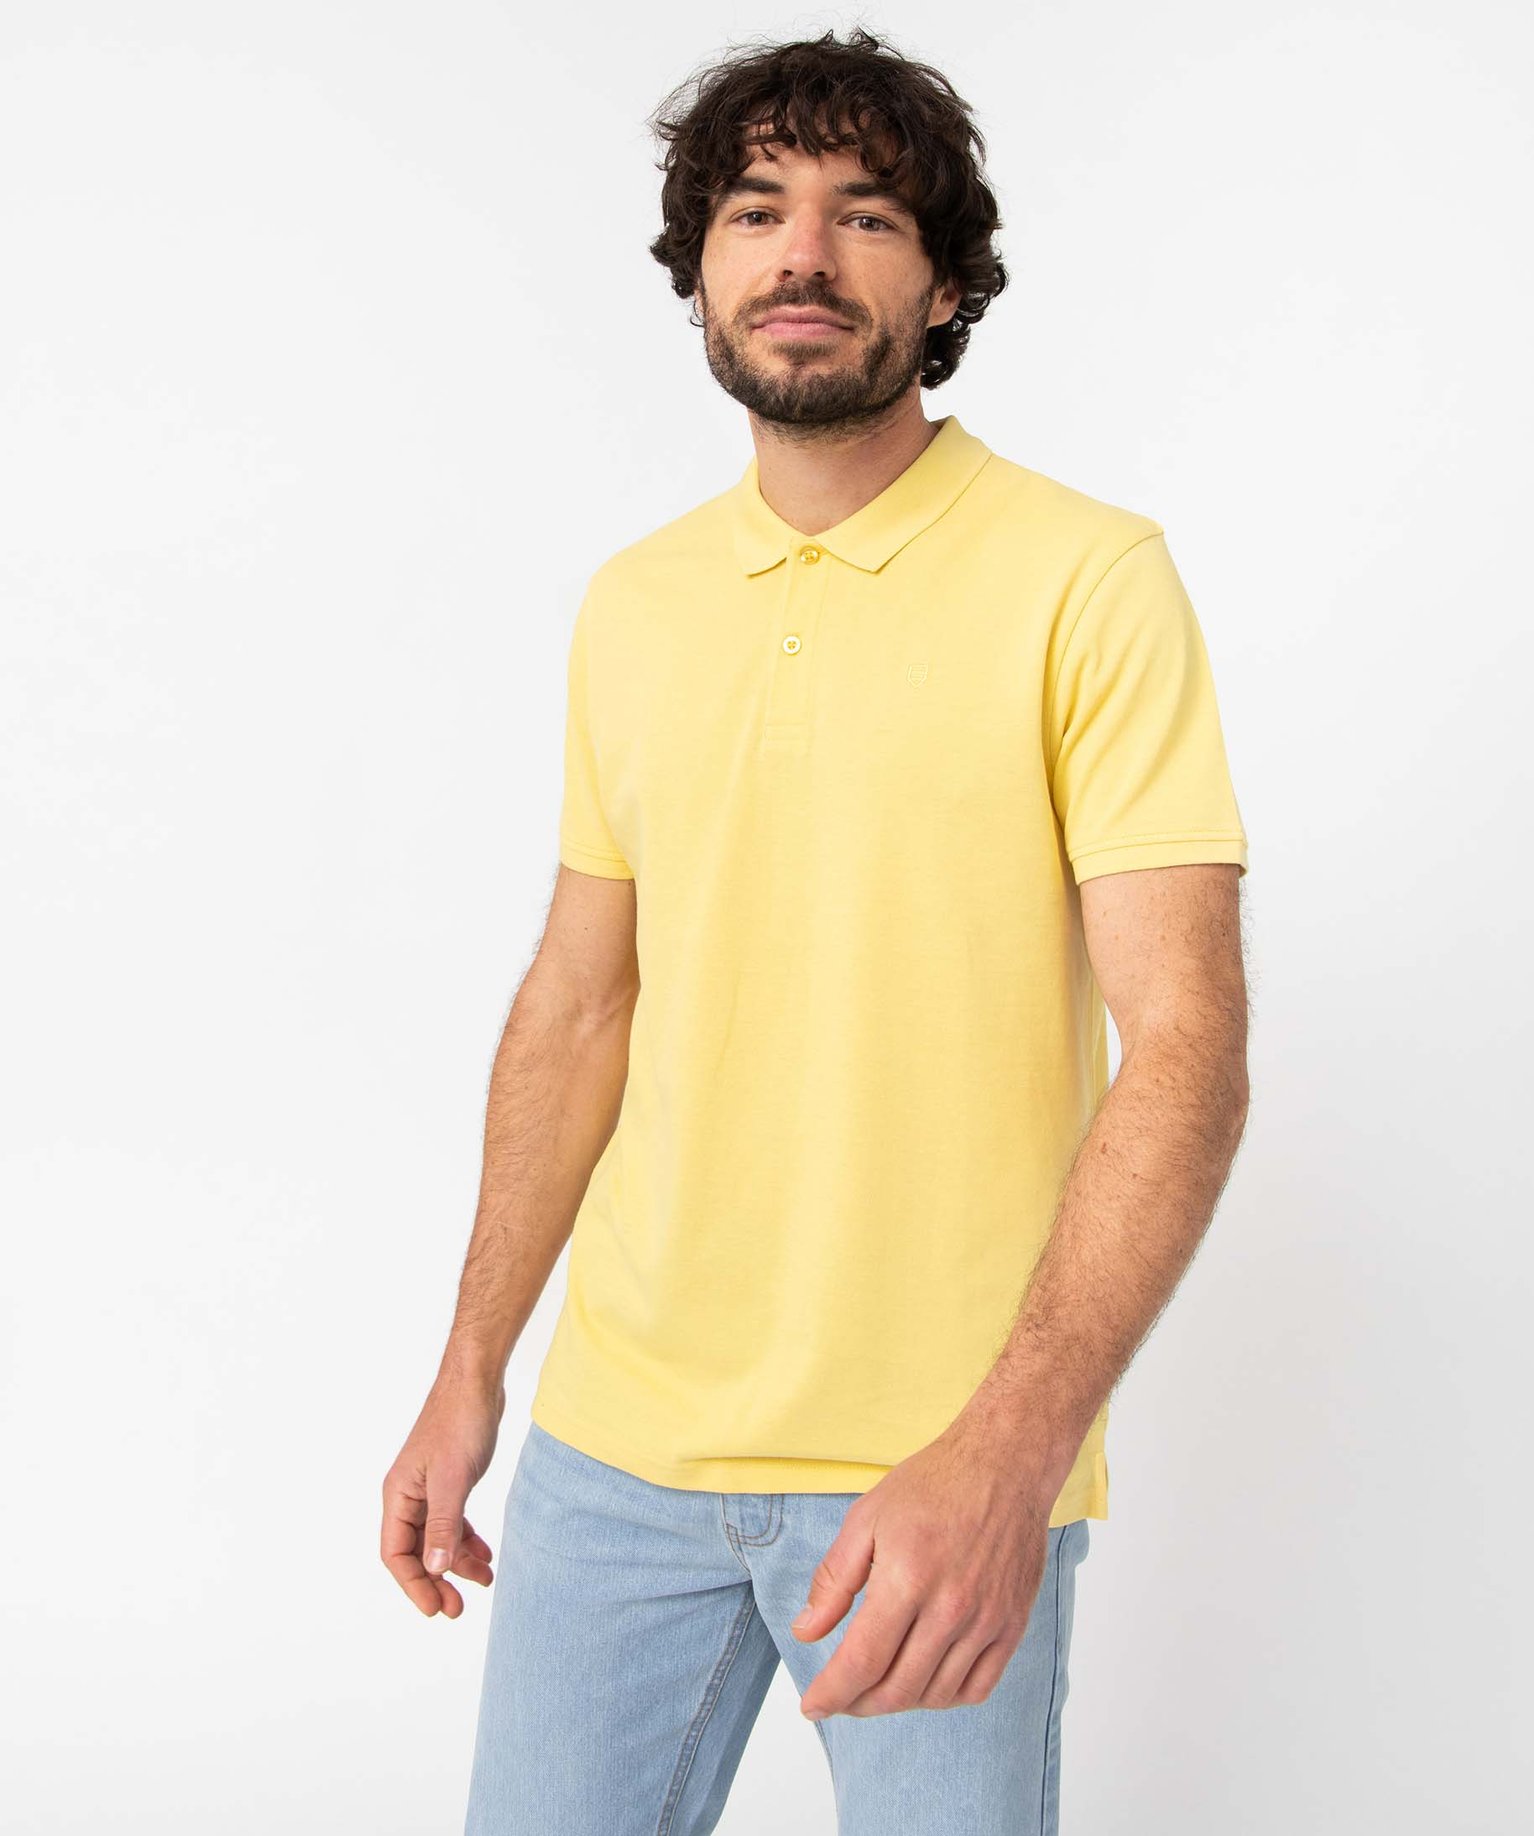 polo a manches courtes en maille piquee homme jaune polos